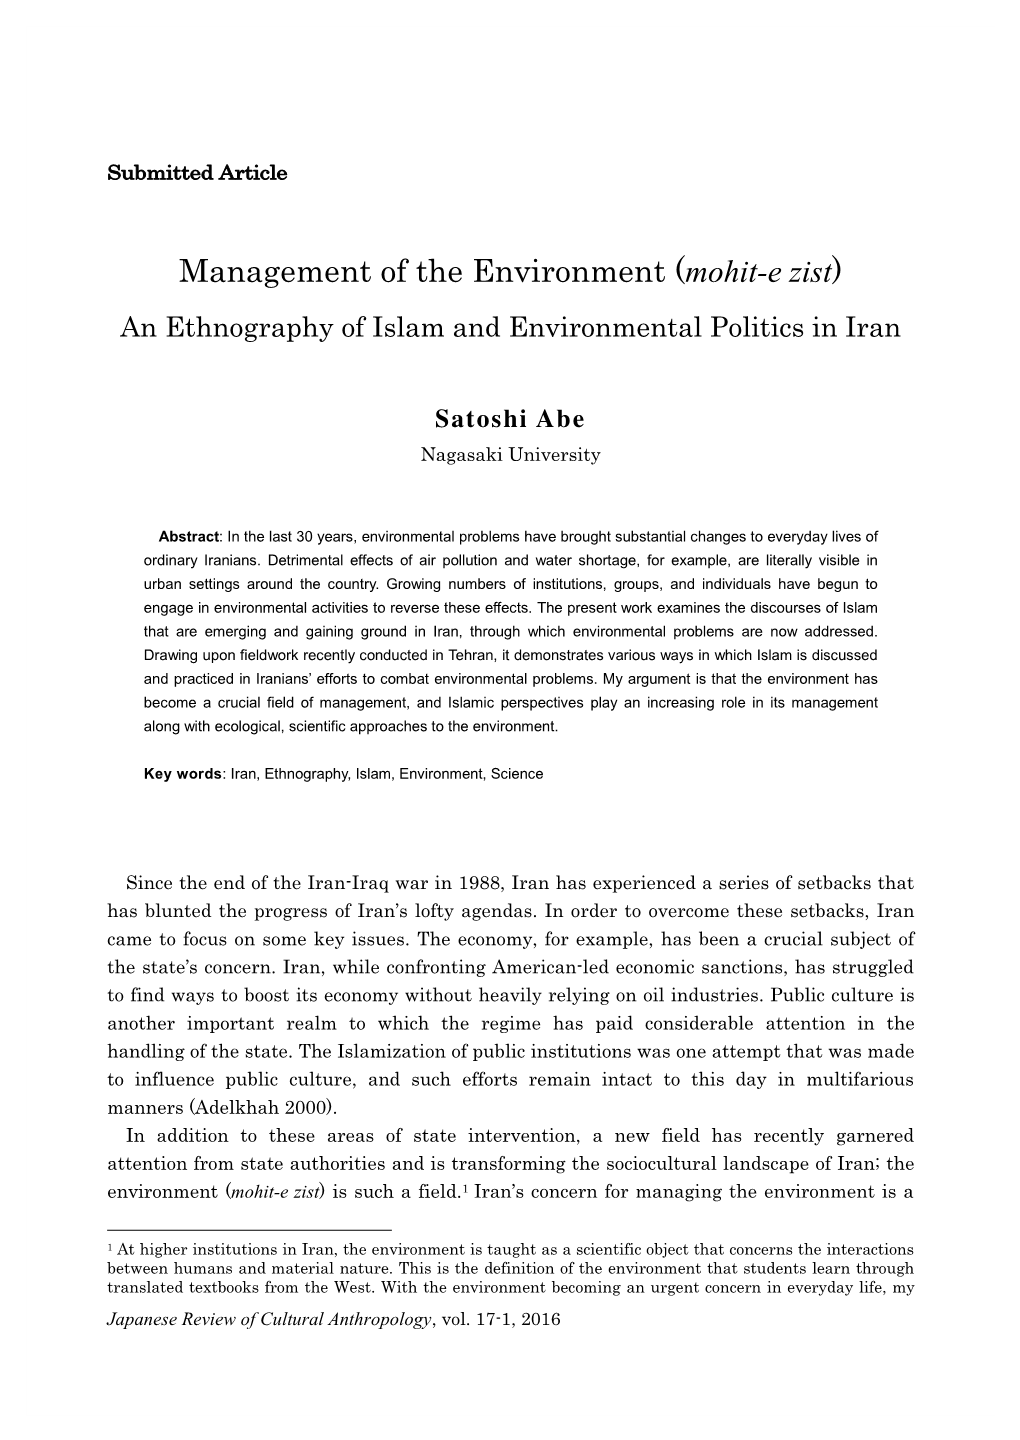 Management of the Environment (Mohit-E Zist) an Ethnography of Islam and Environmental Politics in Iran